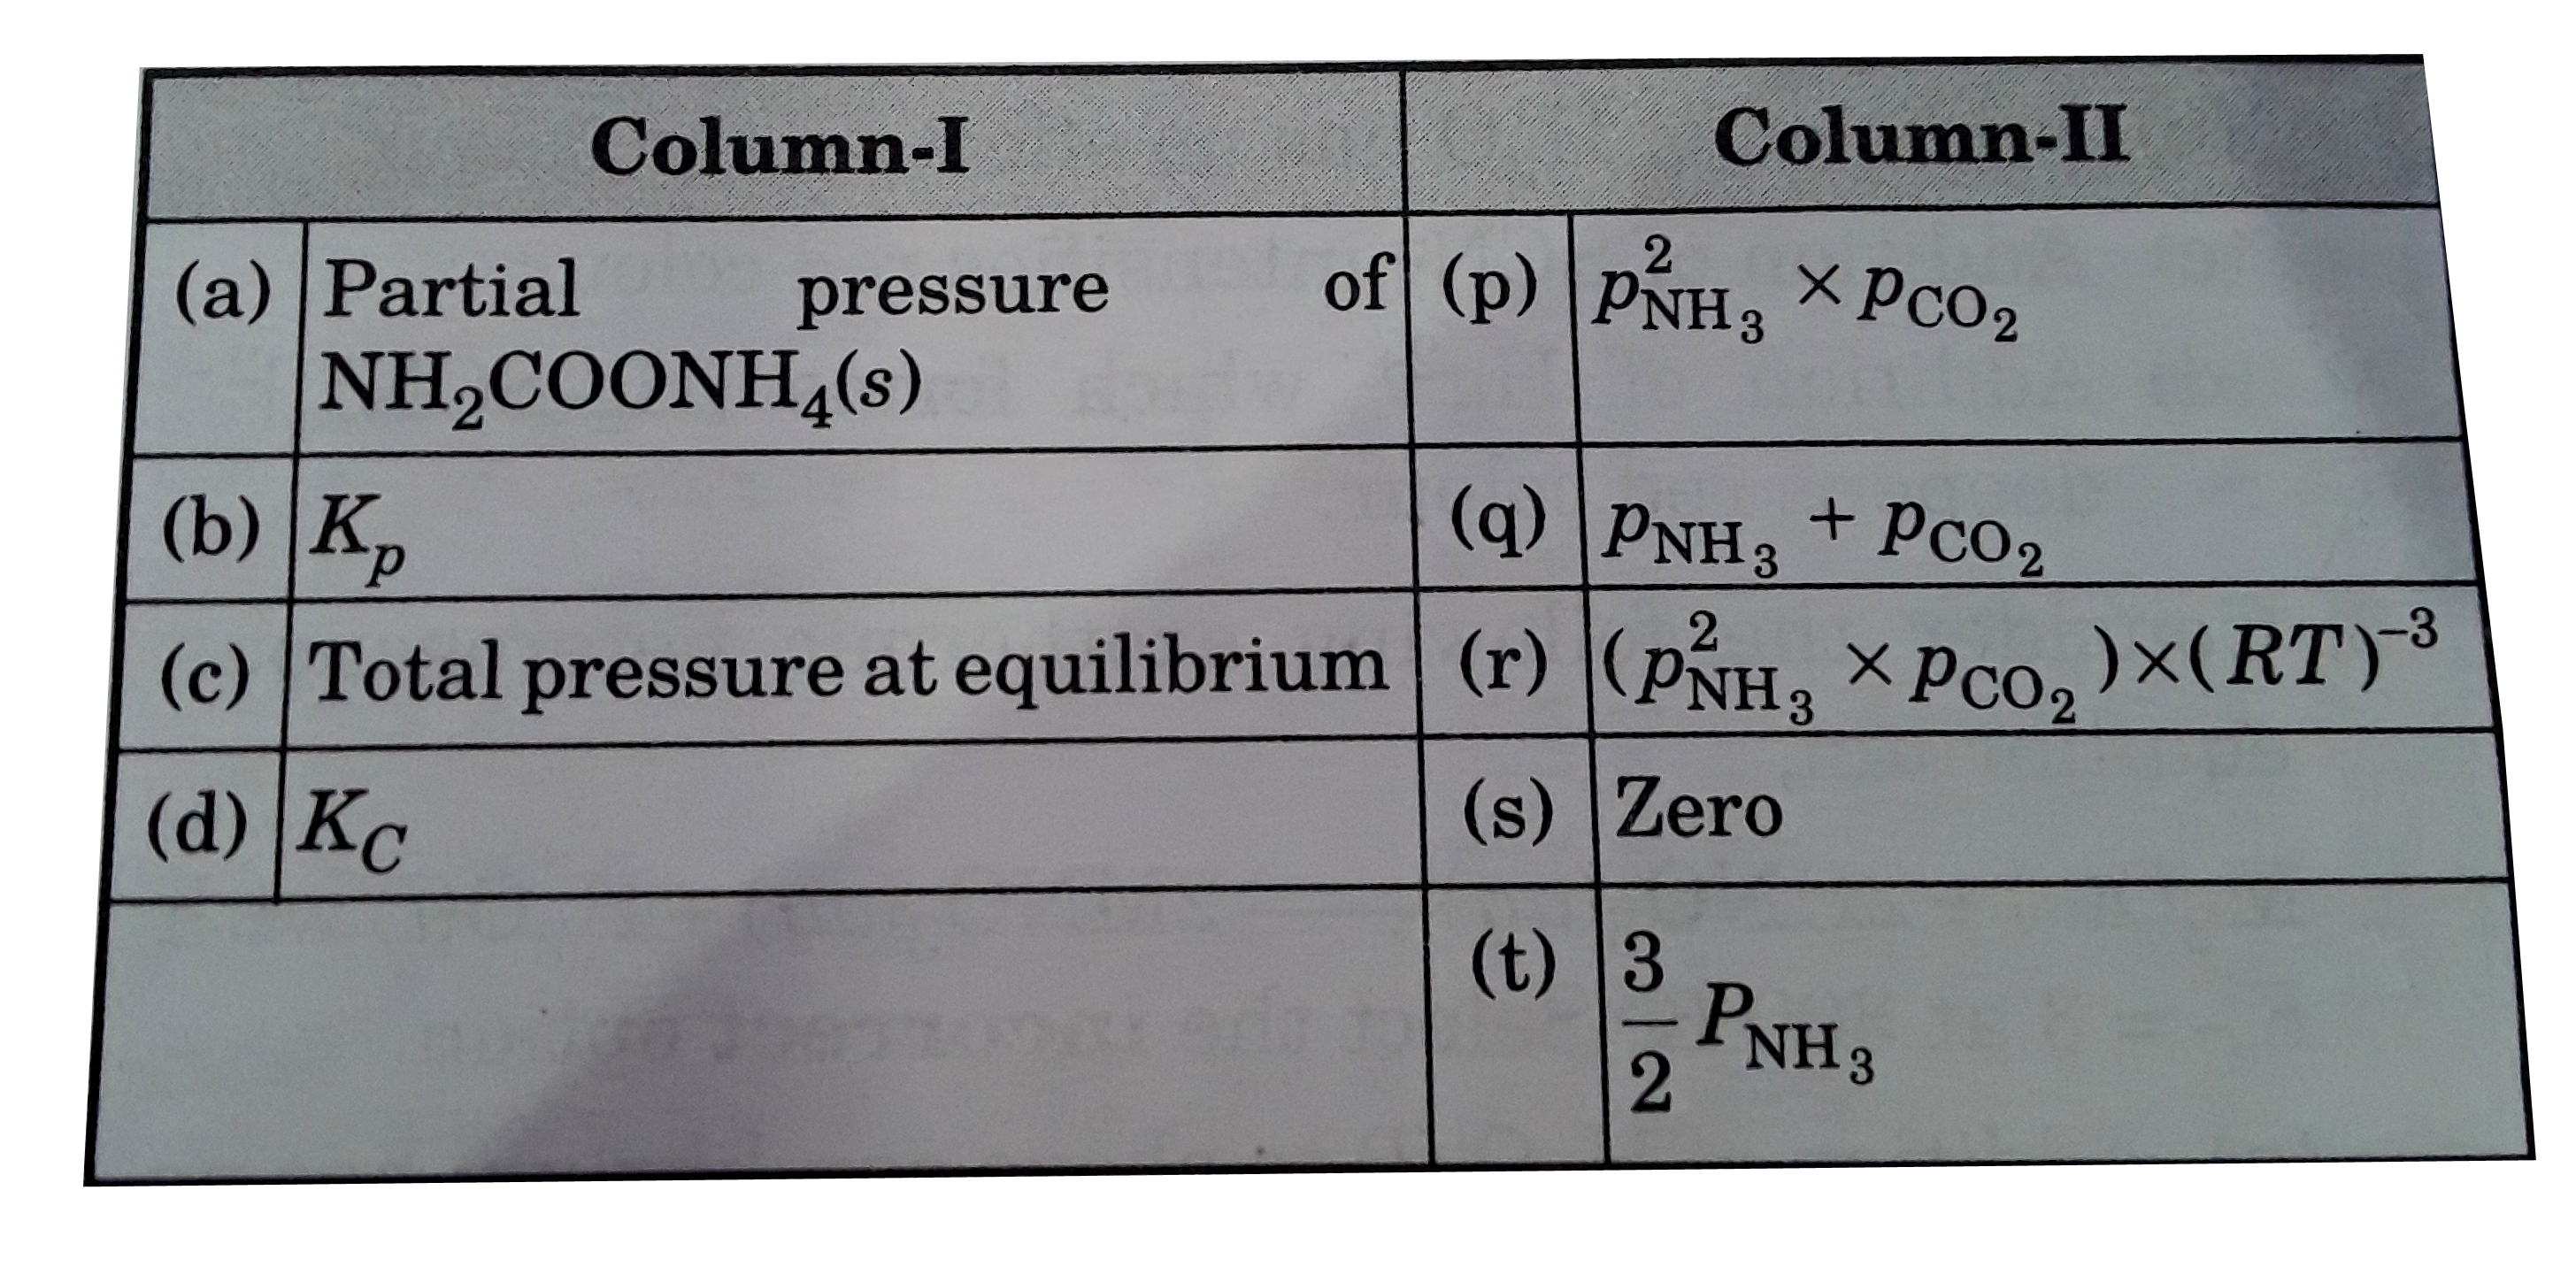 Match the column for the following reaction started with NH2COONH4(s) hArr 2NH3(g)+CO2(g)   At equilibrium , partial pressure of NH3 and CO2 are P(NH3) and  P(CO2) respectively then :